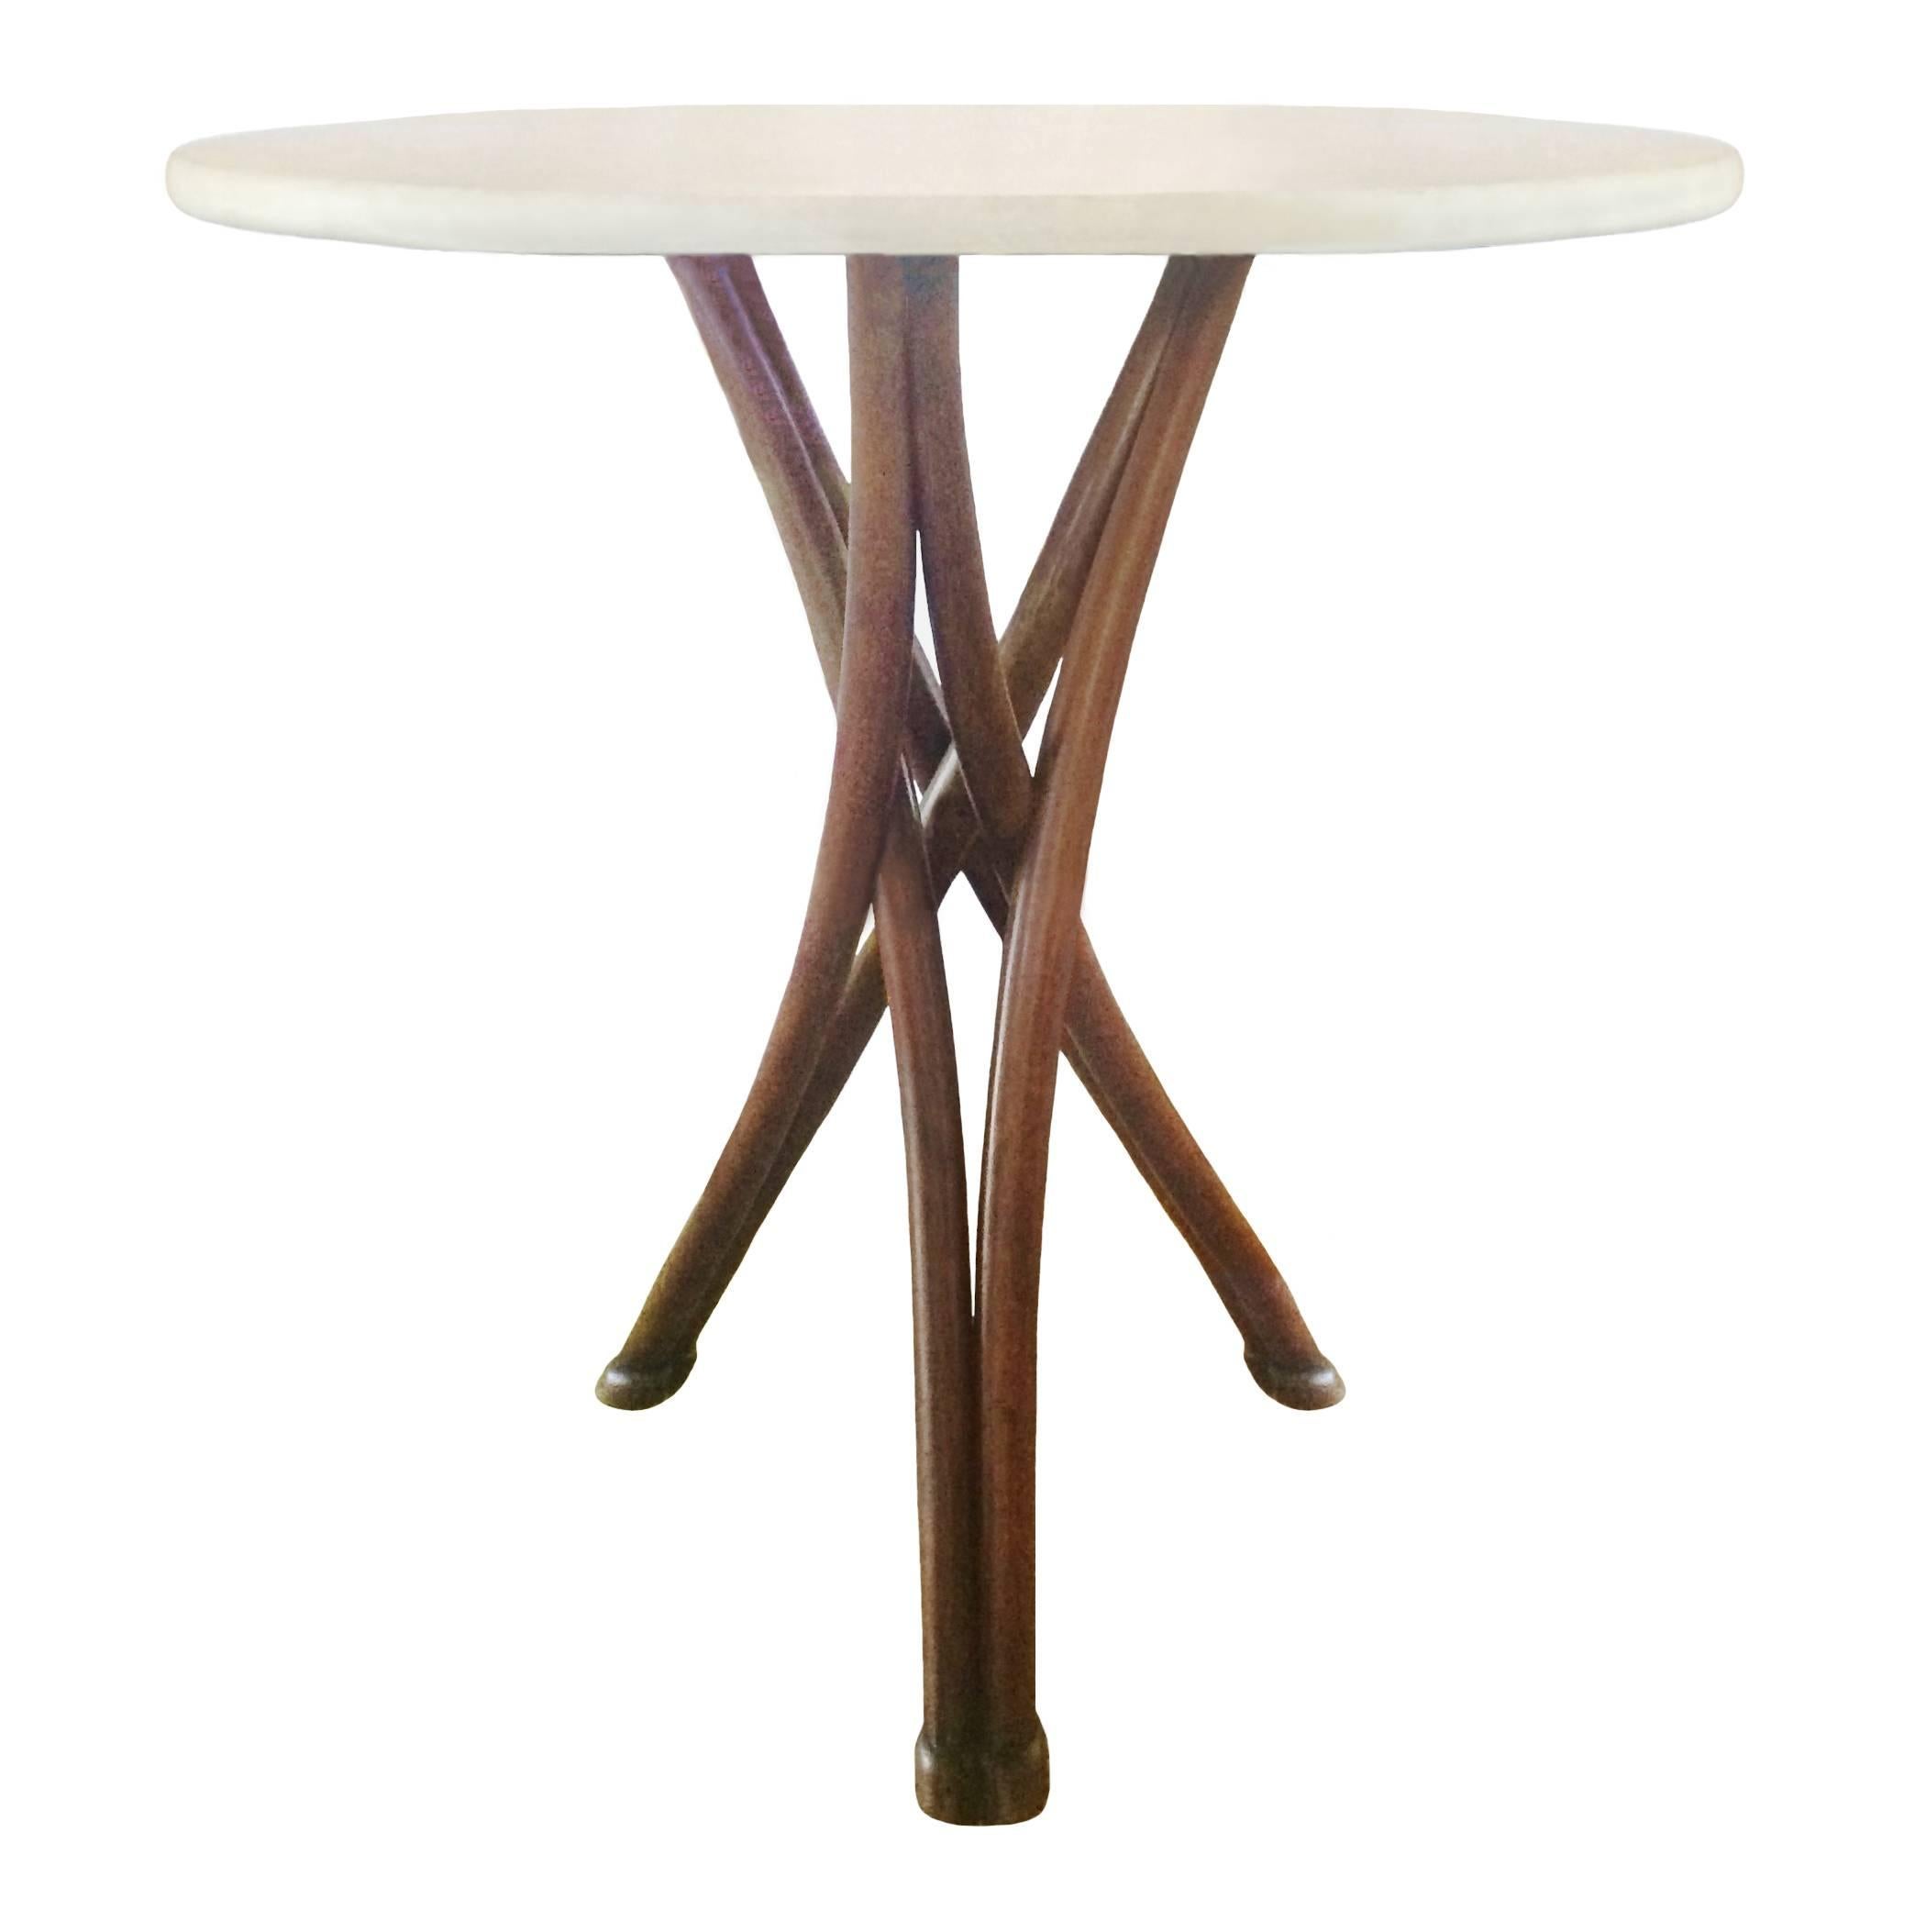 Thonet bentwood table with white marble top; criss cross intersecting tripartite base, Austria, 19th century.

  